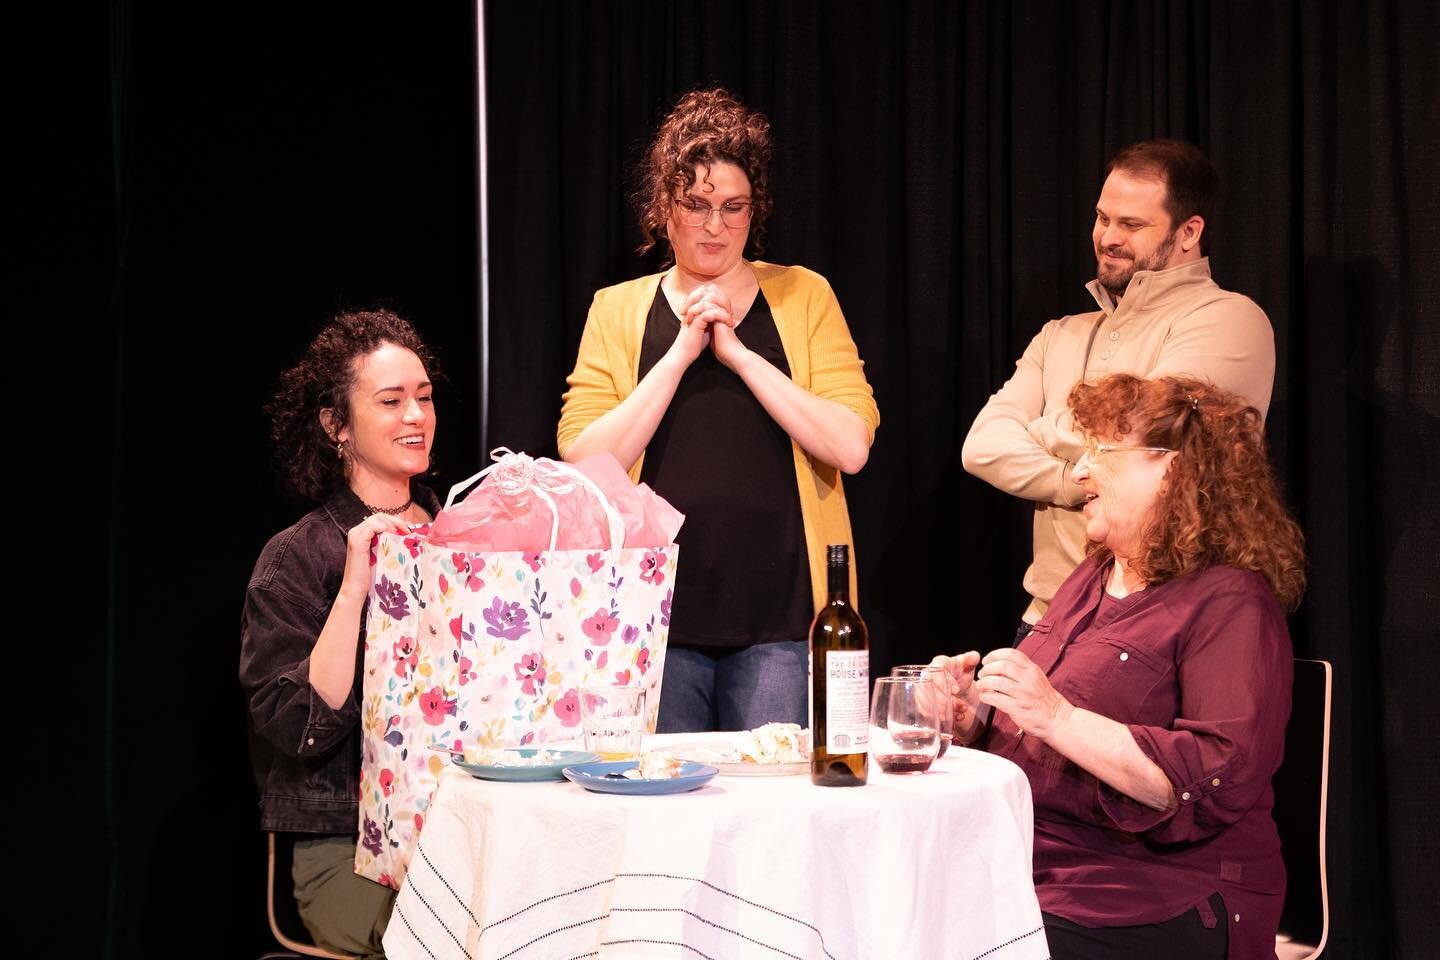 &ldquo;Isn&rsquo;t this nice? Sitting around talking politics? I never do this. It&rsquo;s a nice change.&rdquo;

Rabbit Hole runs for one more weekend &mdash; March 10-12. Come see a birthday party gone sideways, a very awkward open house, and many 